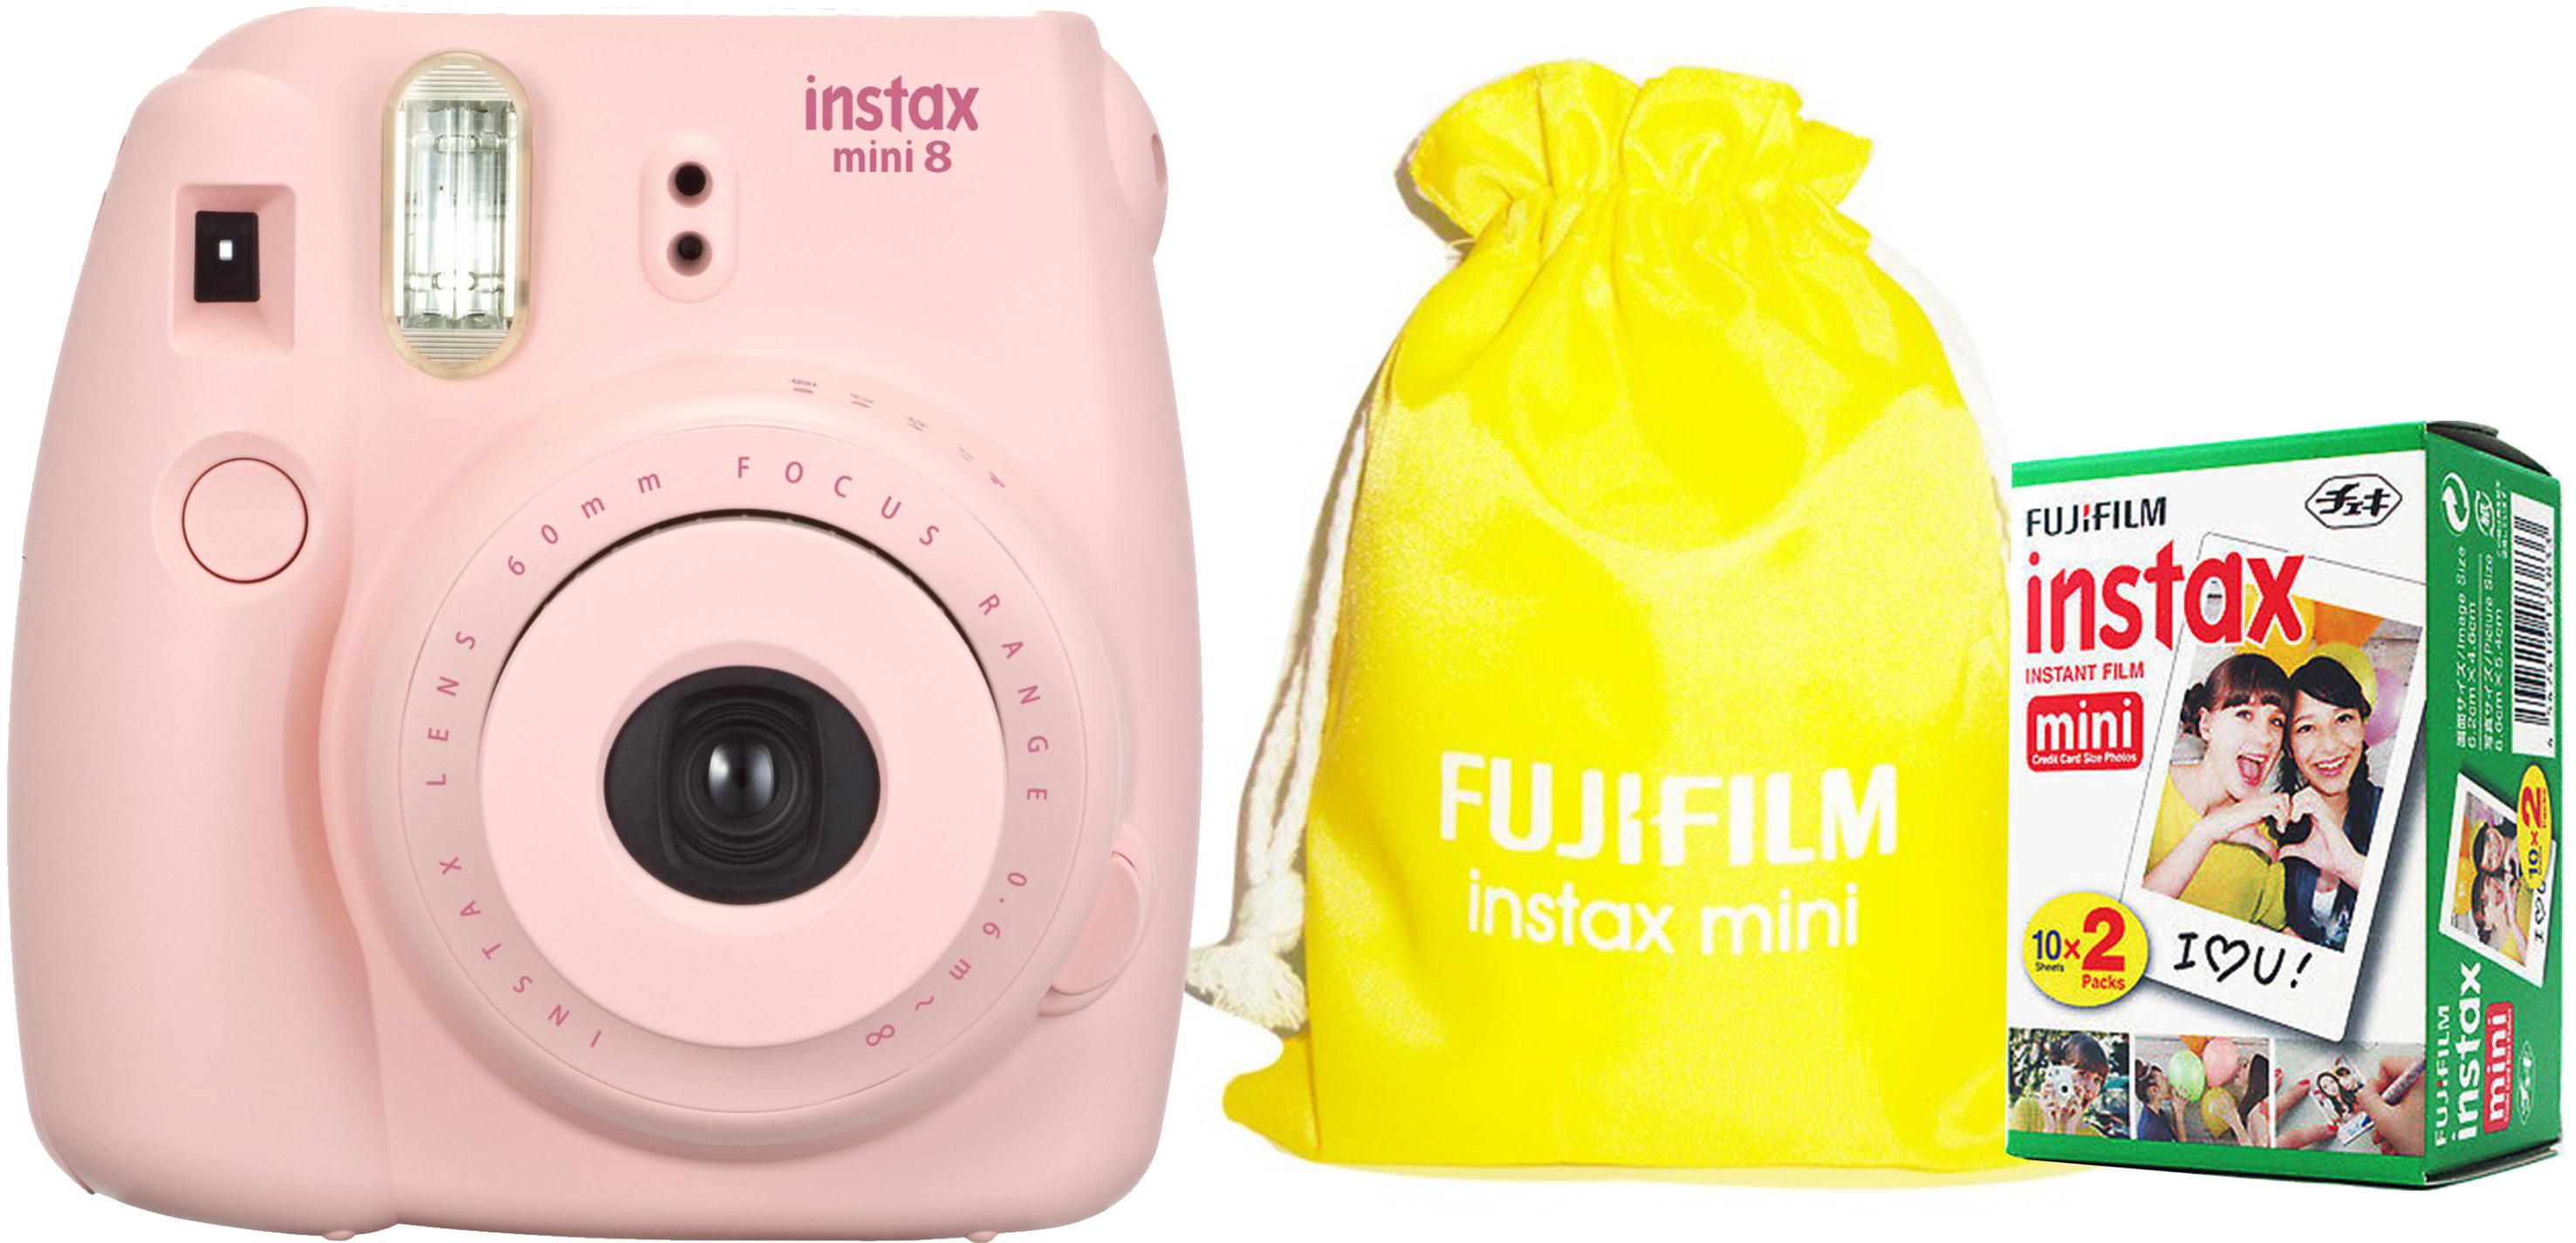 Fujifilm Instax Mini 8 Instant Film Camera Pink with Yellow Pouch and 20 Film Sheet